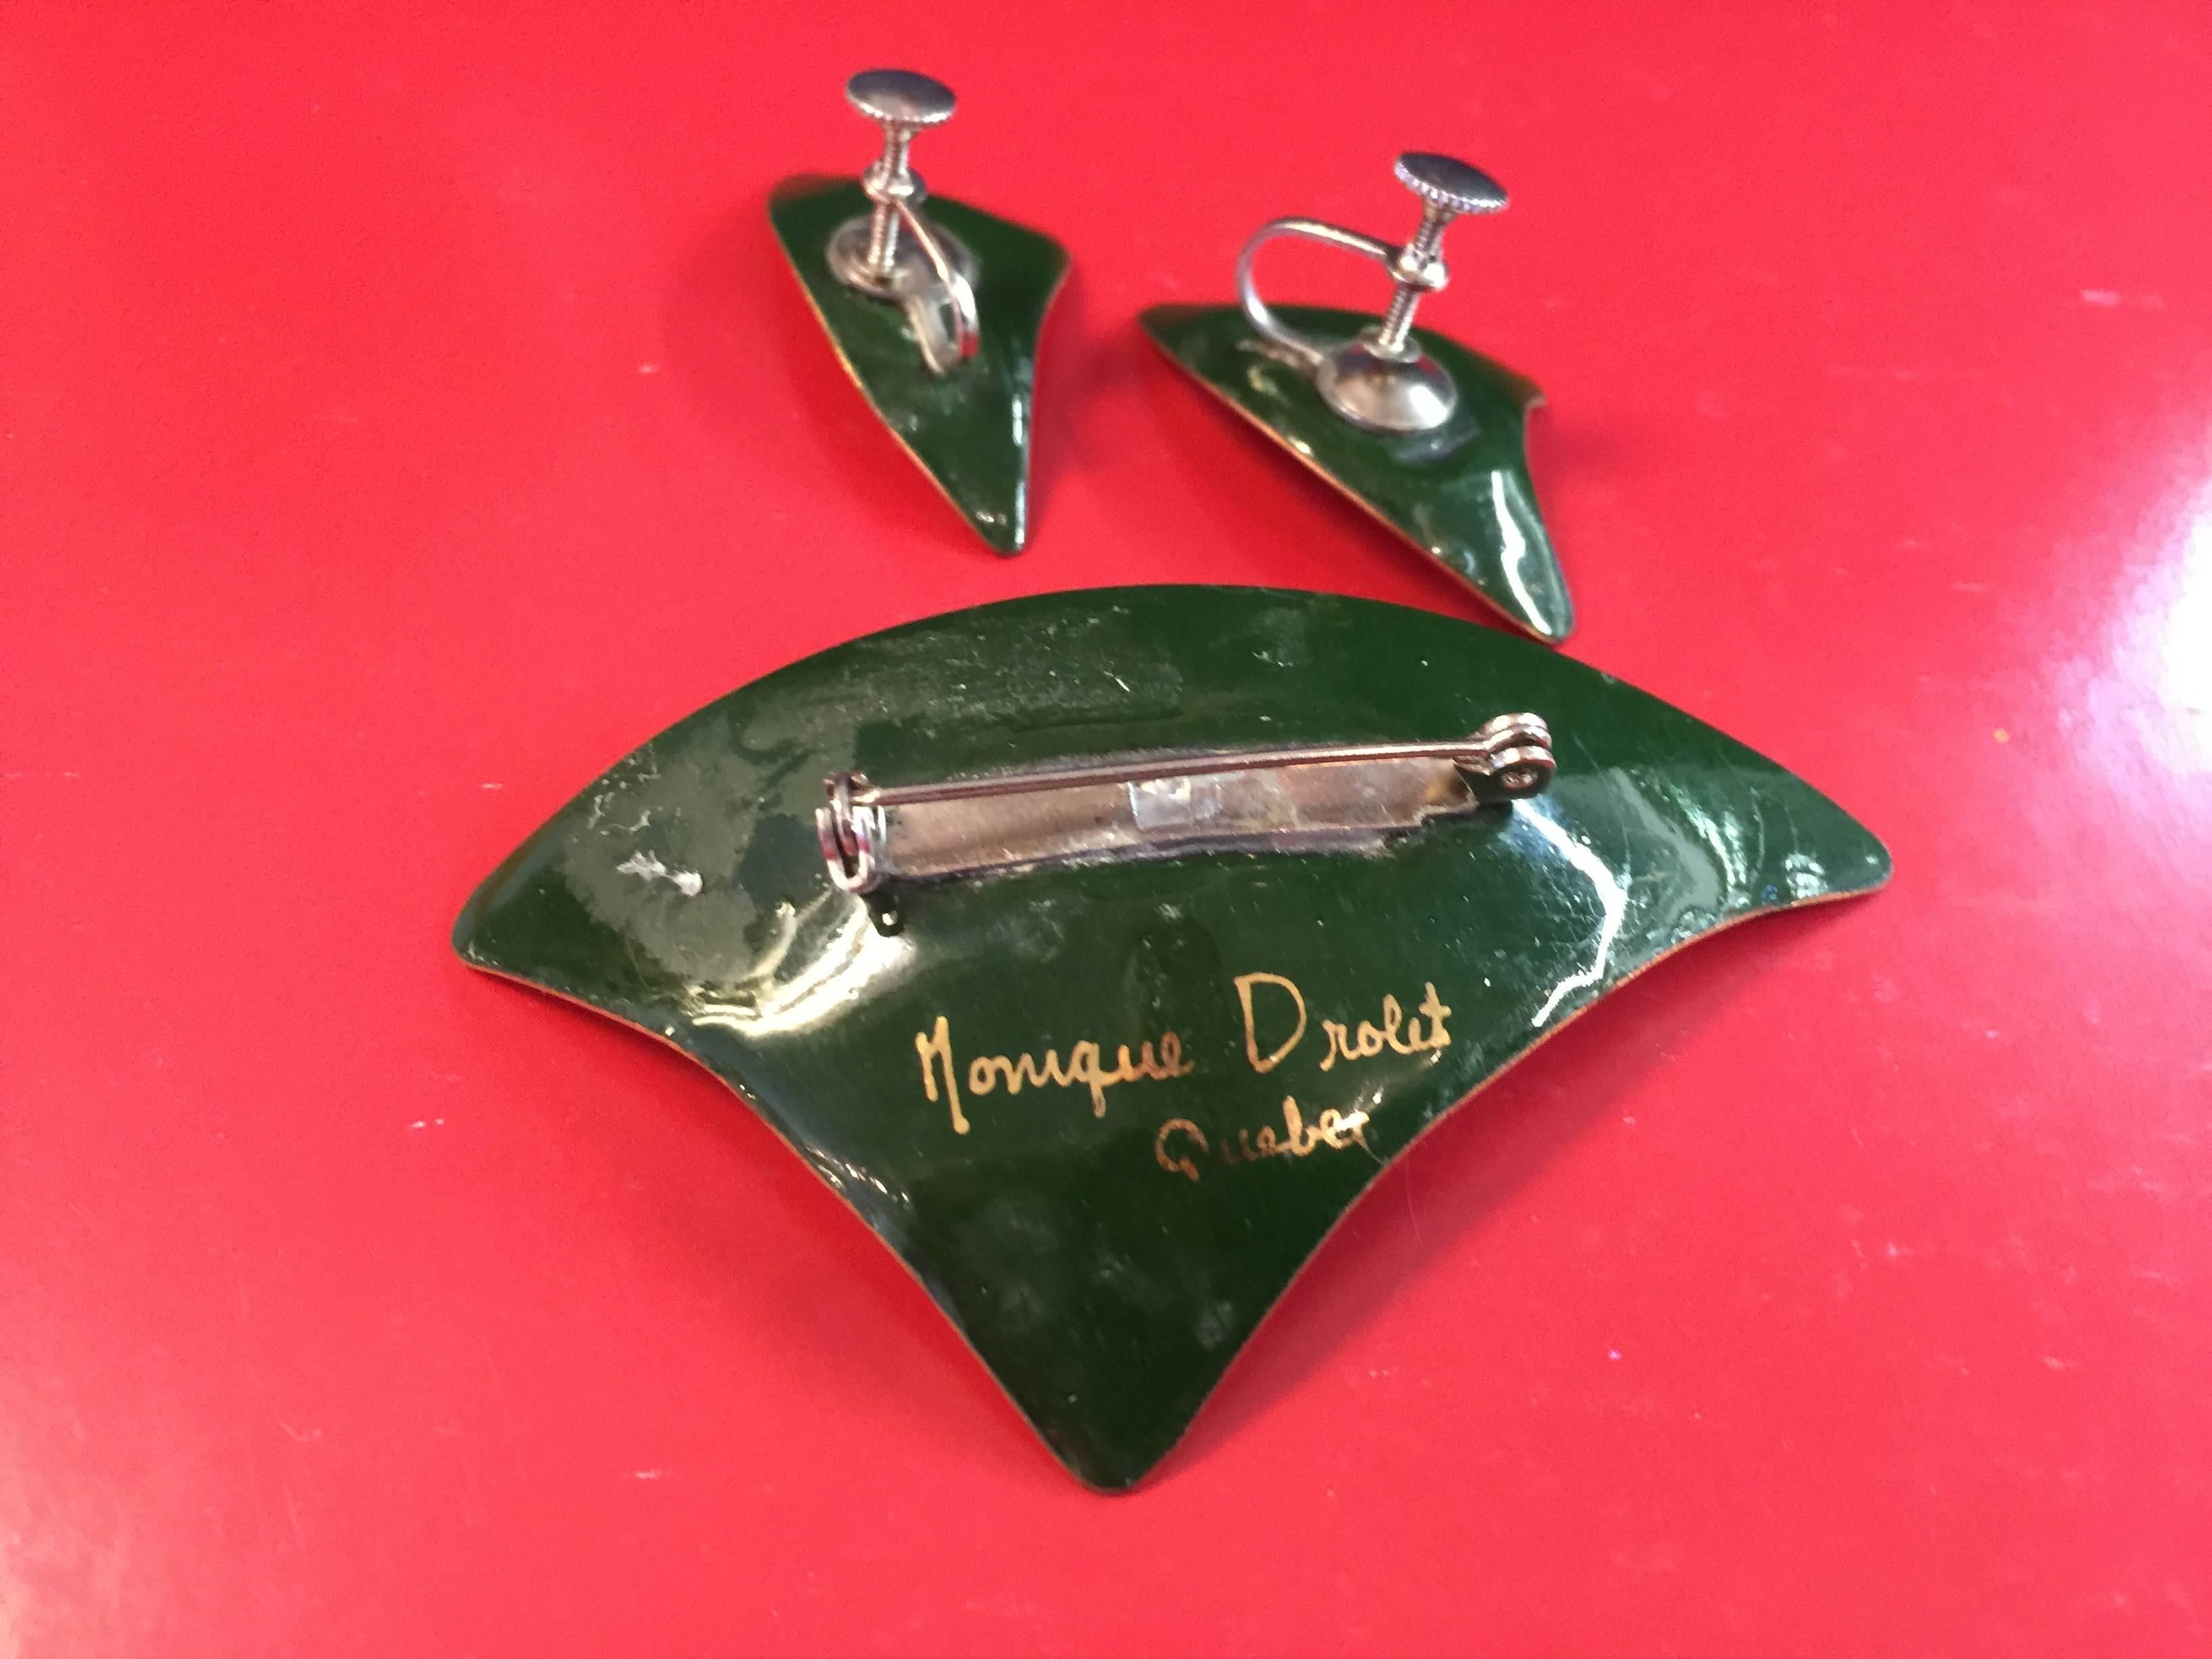 This MONIQUE DROLET Modernist Boomerang Copper and Enameled Brooch Pin and Earrings Set is classically 1950s in tone, material and execution. Part of the Modernist tradition in Quebec in the 1950's and 1960's, this particular artist demonstrates a